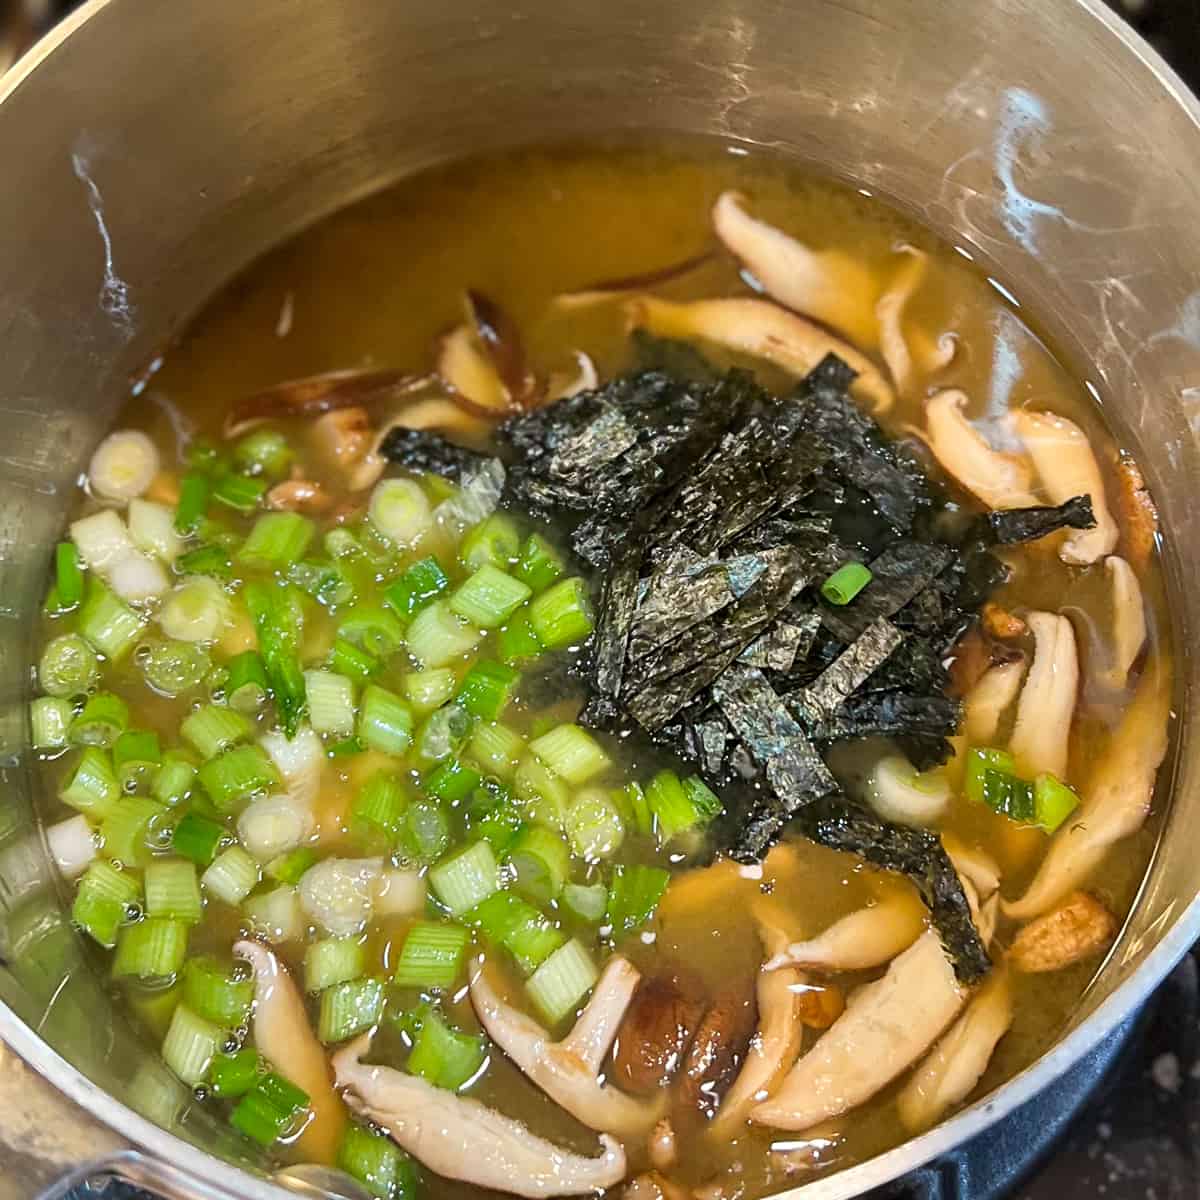 top view of pot on a stove with vegetable broth, tofu, green onion and nori seaweed